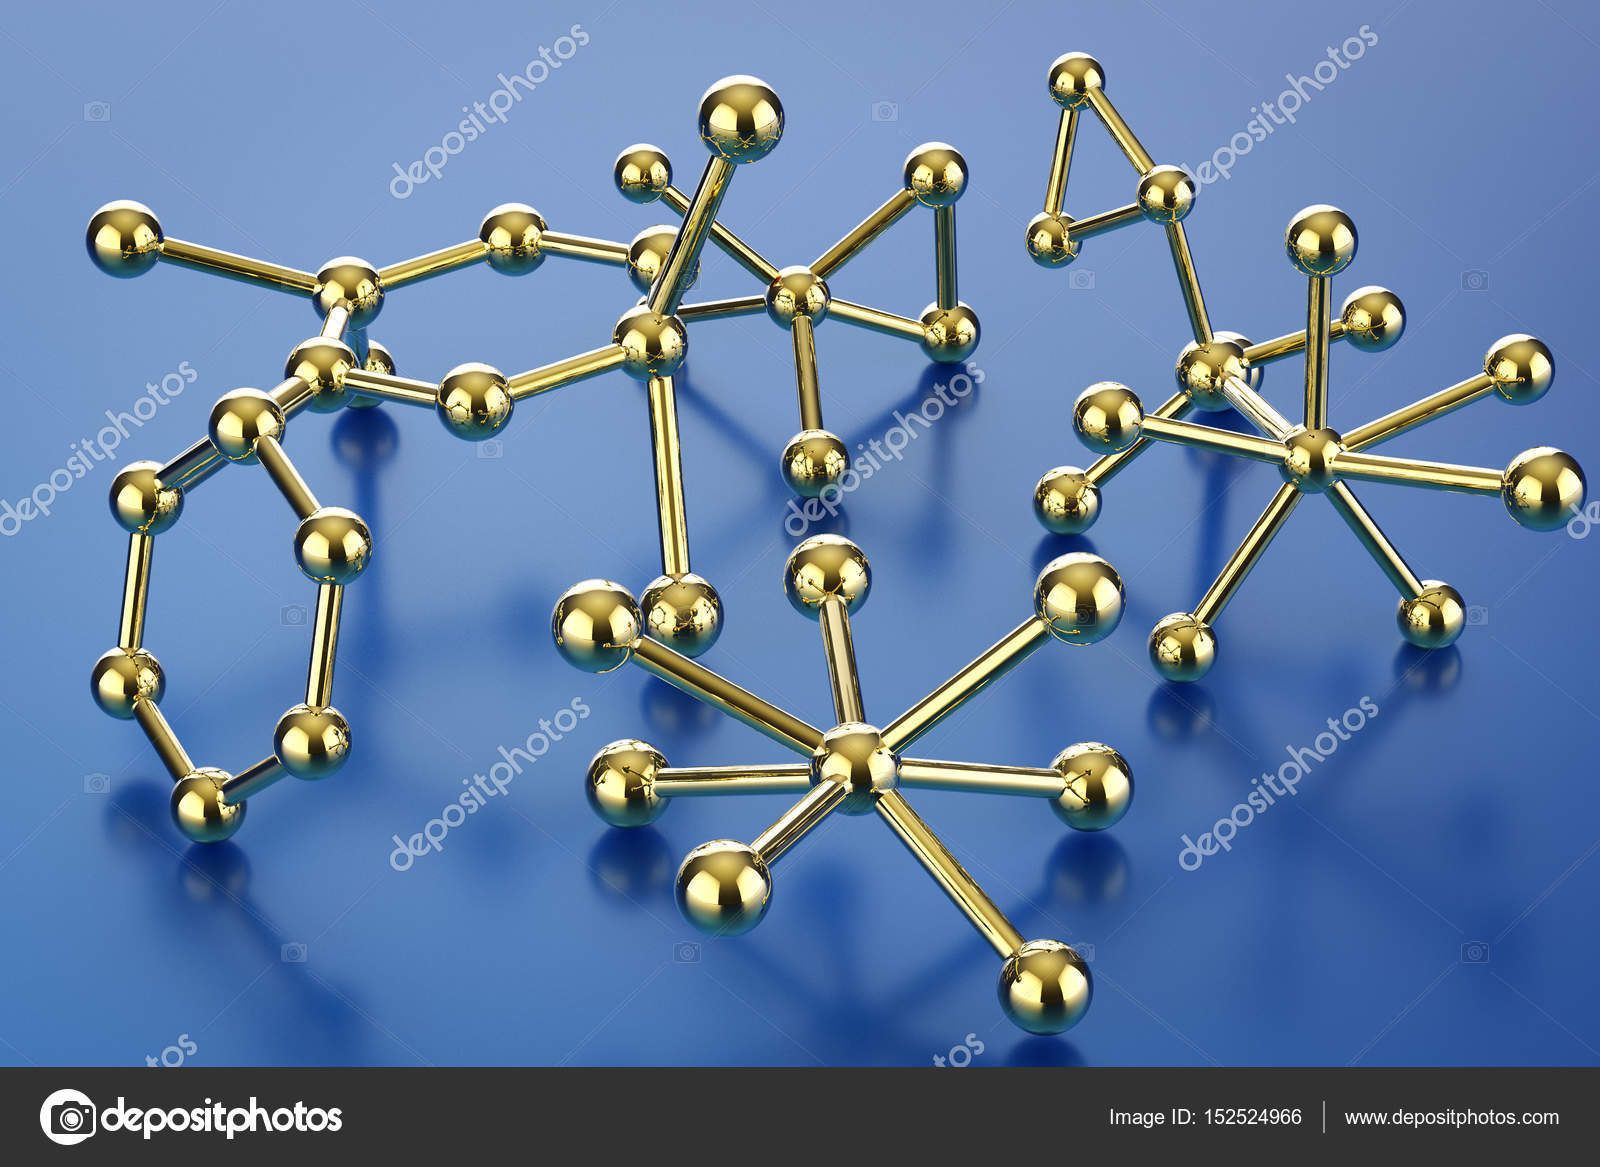 With Erections Gold Molecular Model